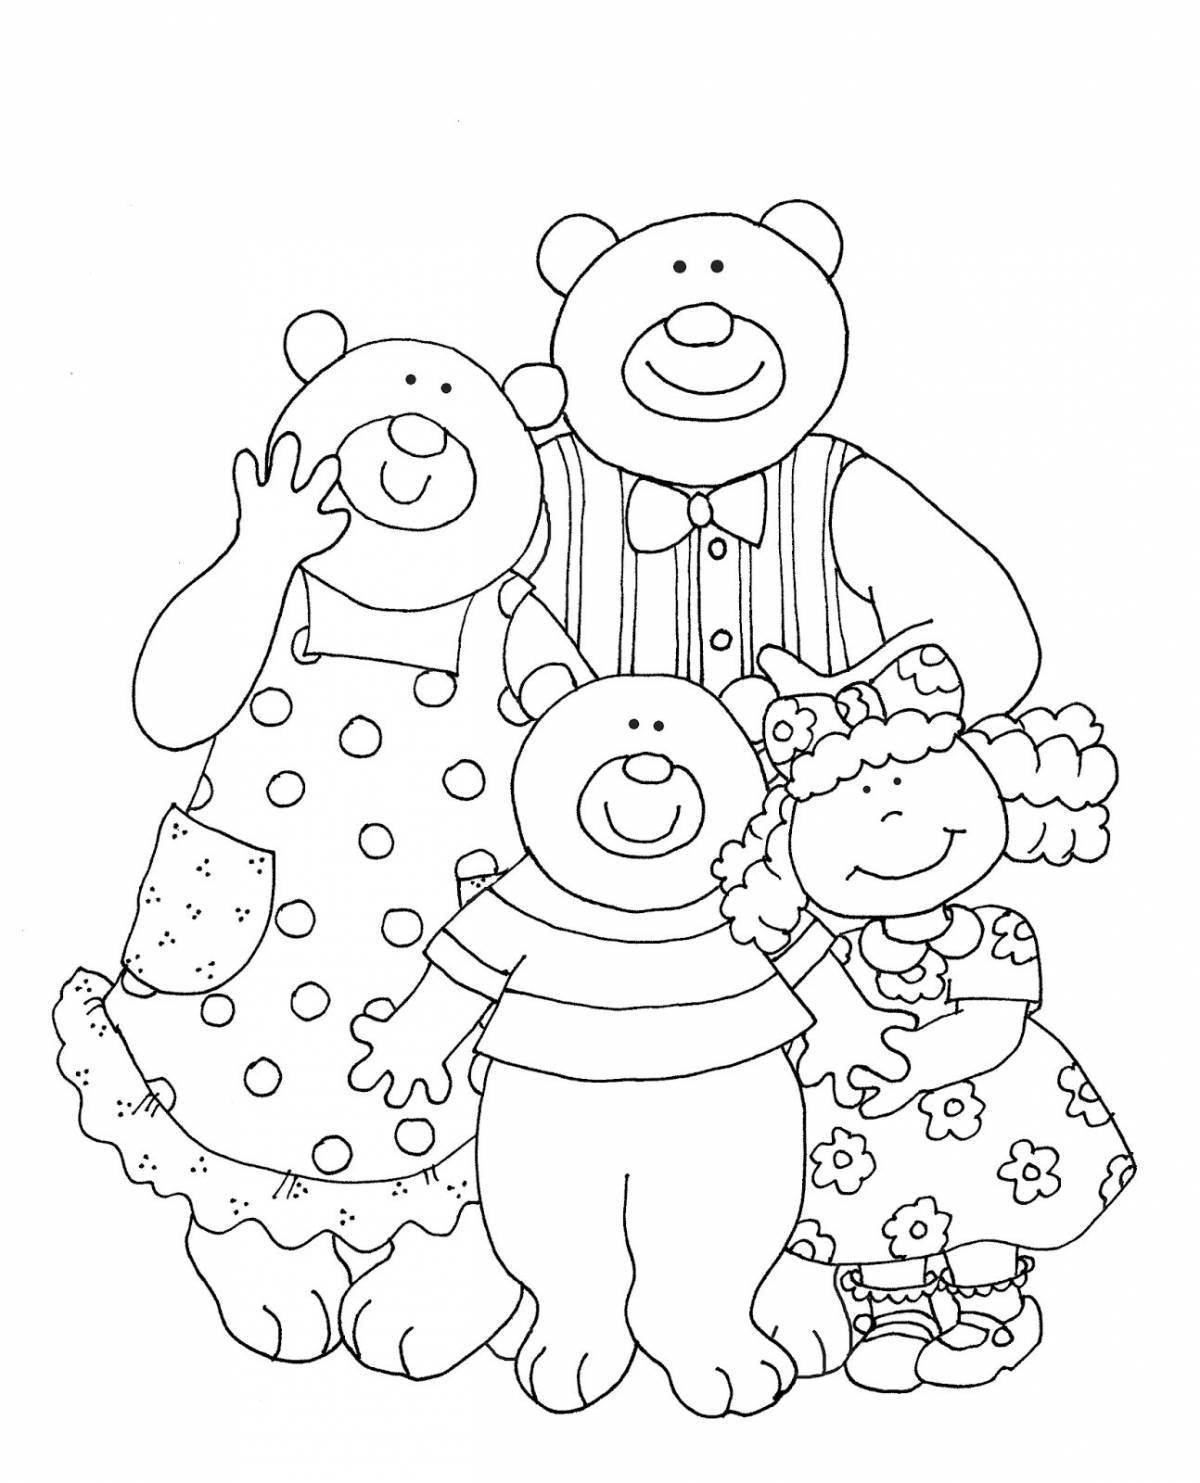 Invitation of three bears coloring book for preschoolers